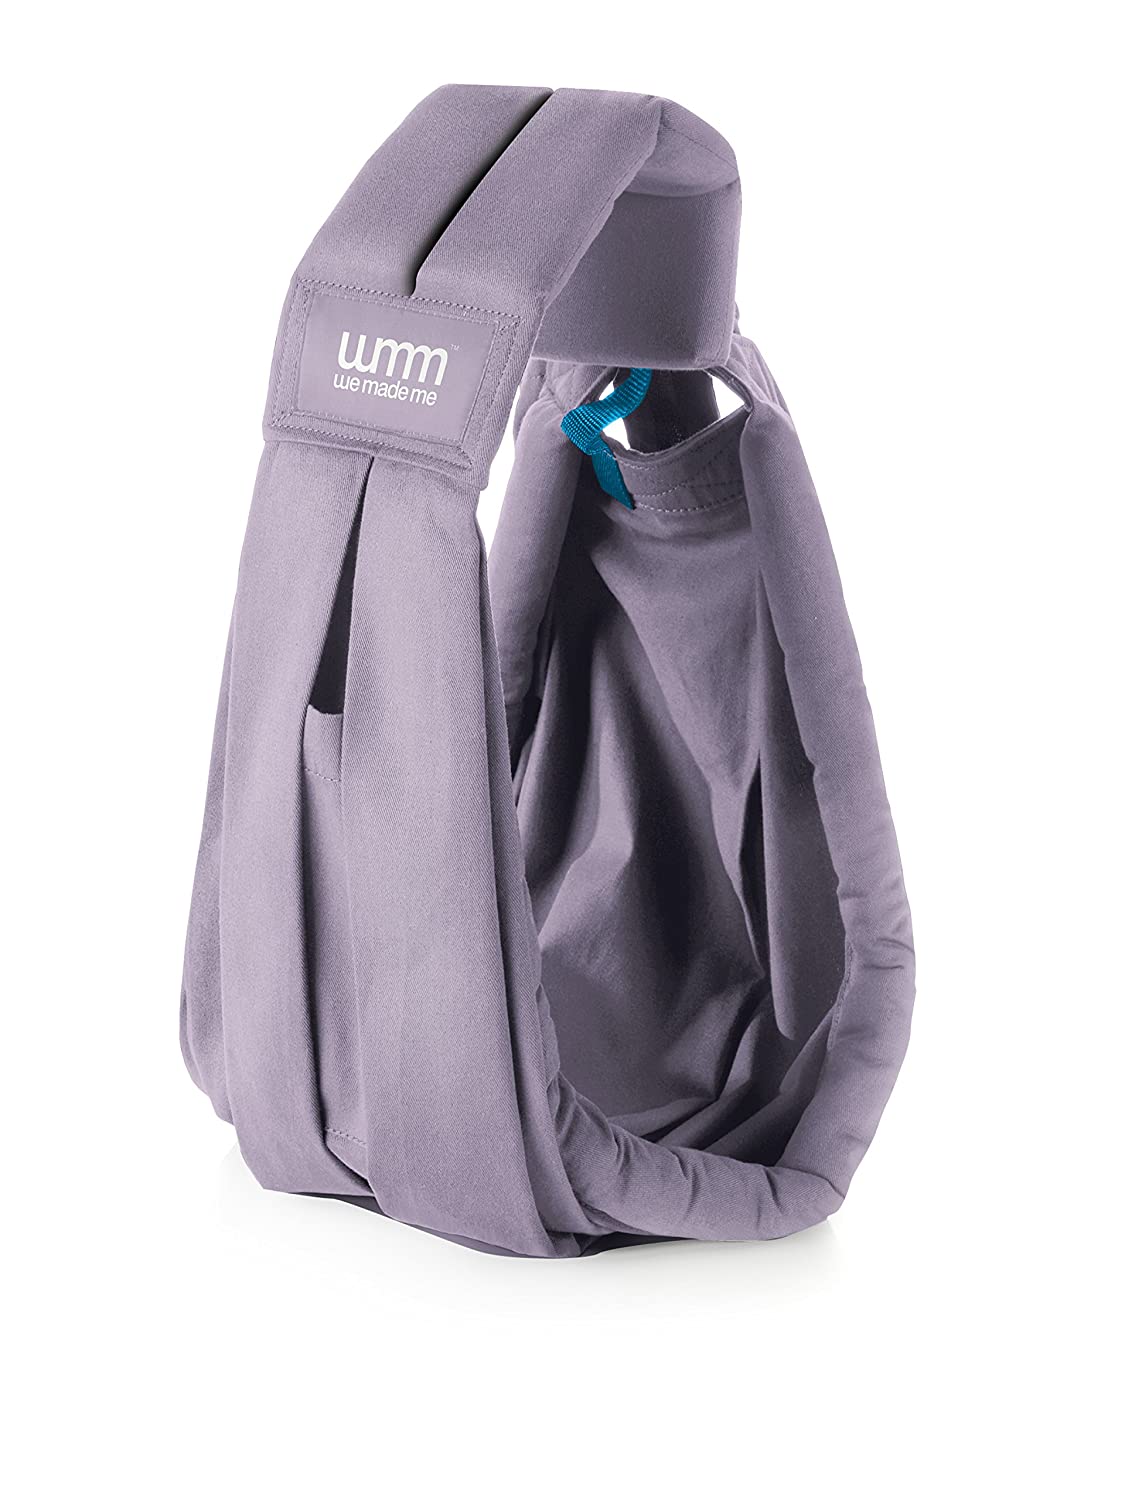 Soohu WMM Baby Carrier Sling Classic Lavender – SSCLL1014